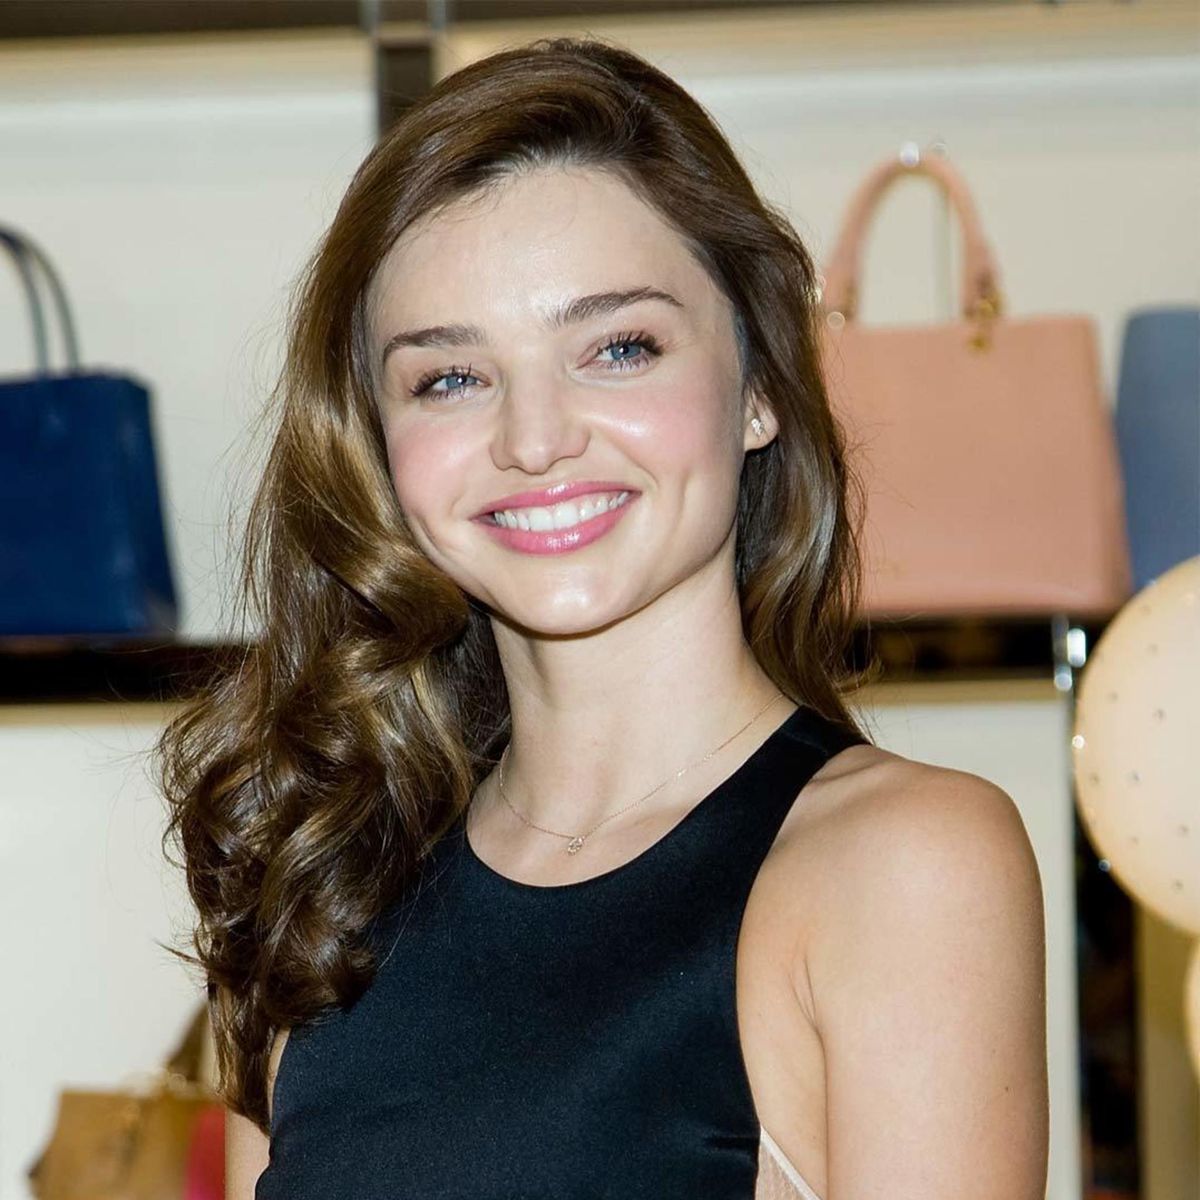 Miranda Kerr on her flirtatious nature and being a Victoria's